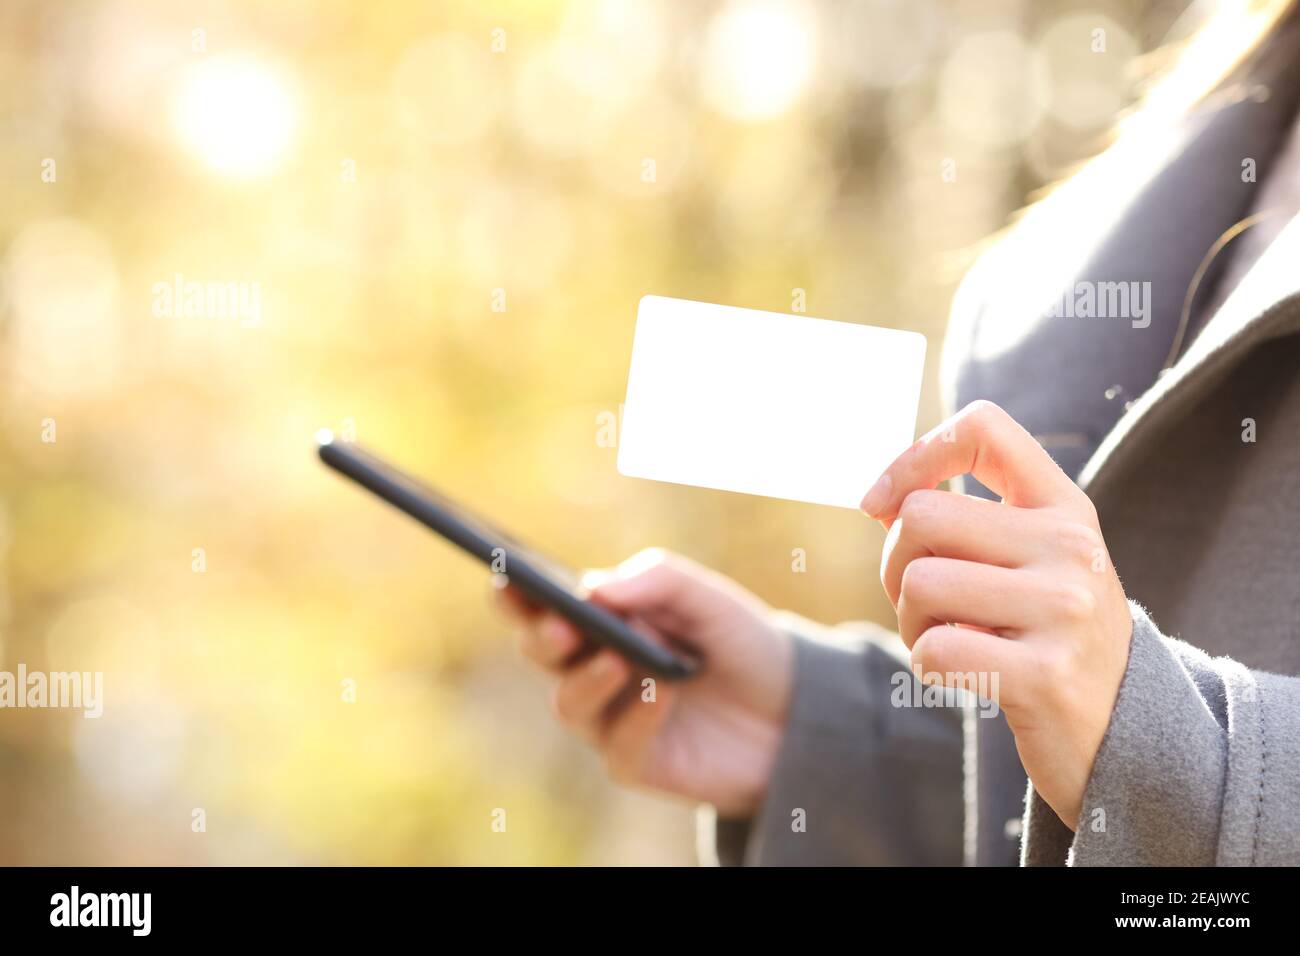 Woman buying online with phone showing credit card in fall Stock Photo